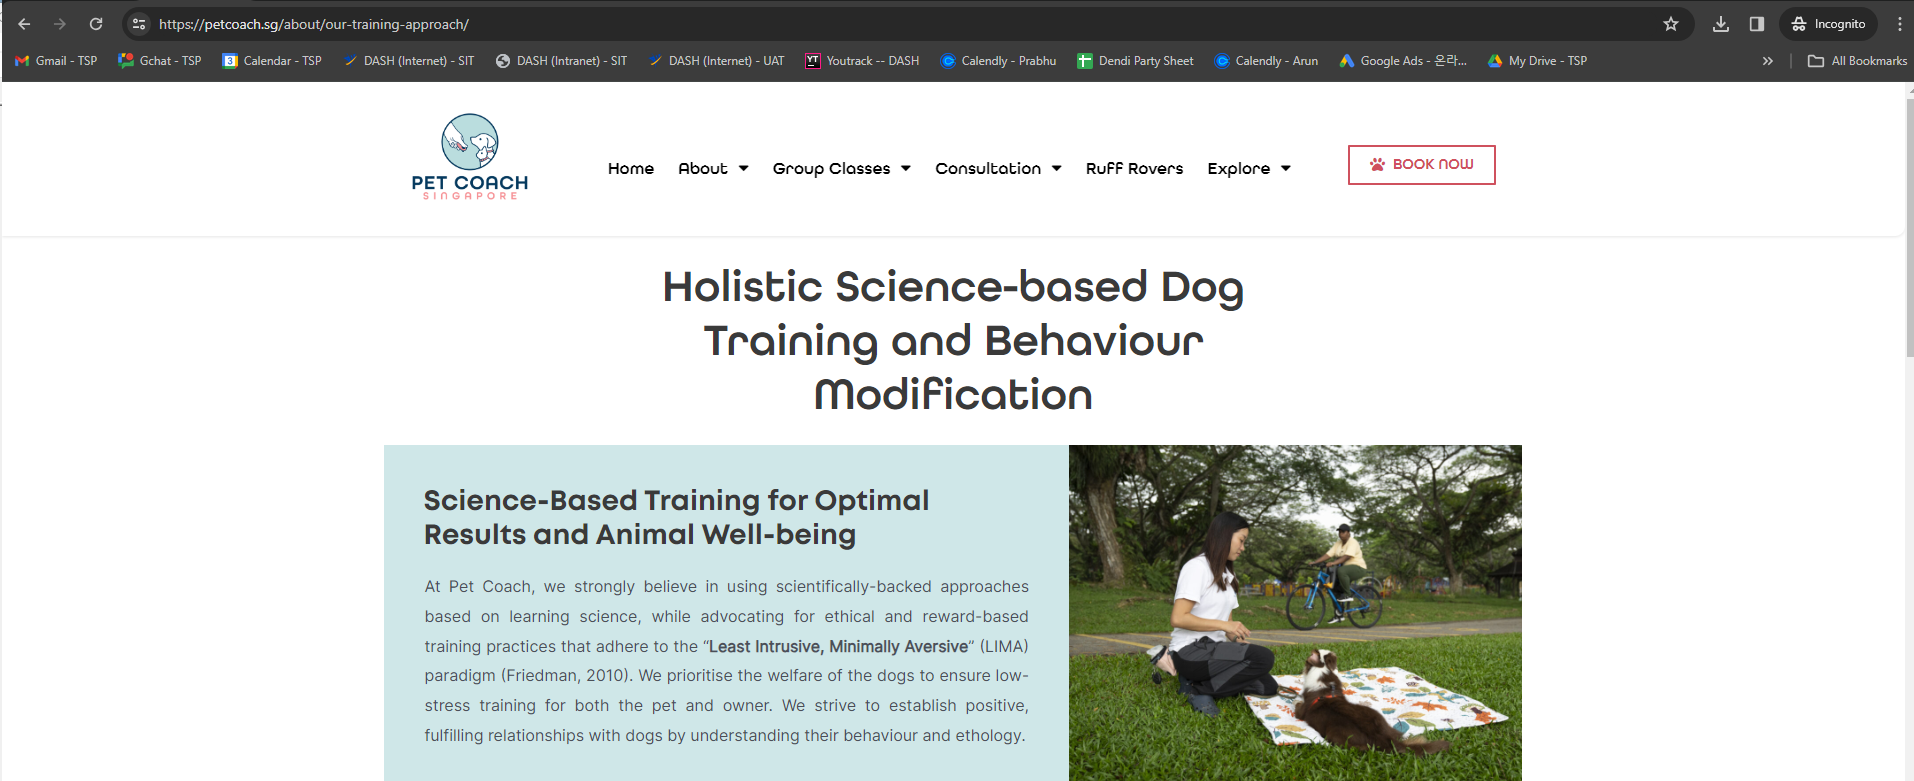 Image of pet coach SG training approach, for dog owners whom are interested in training dogs